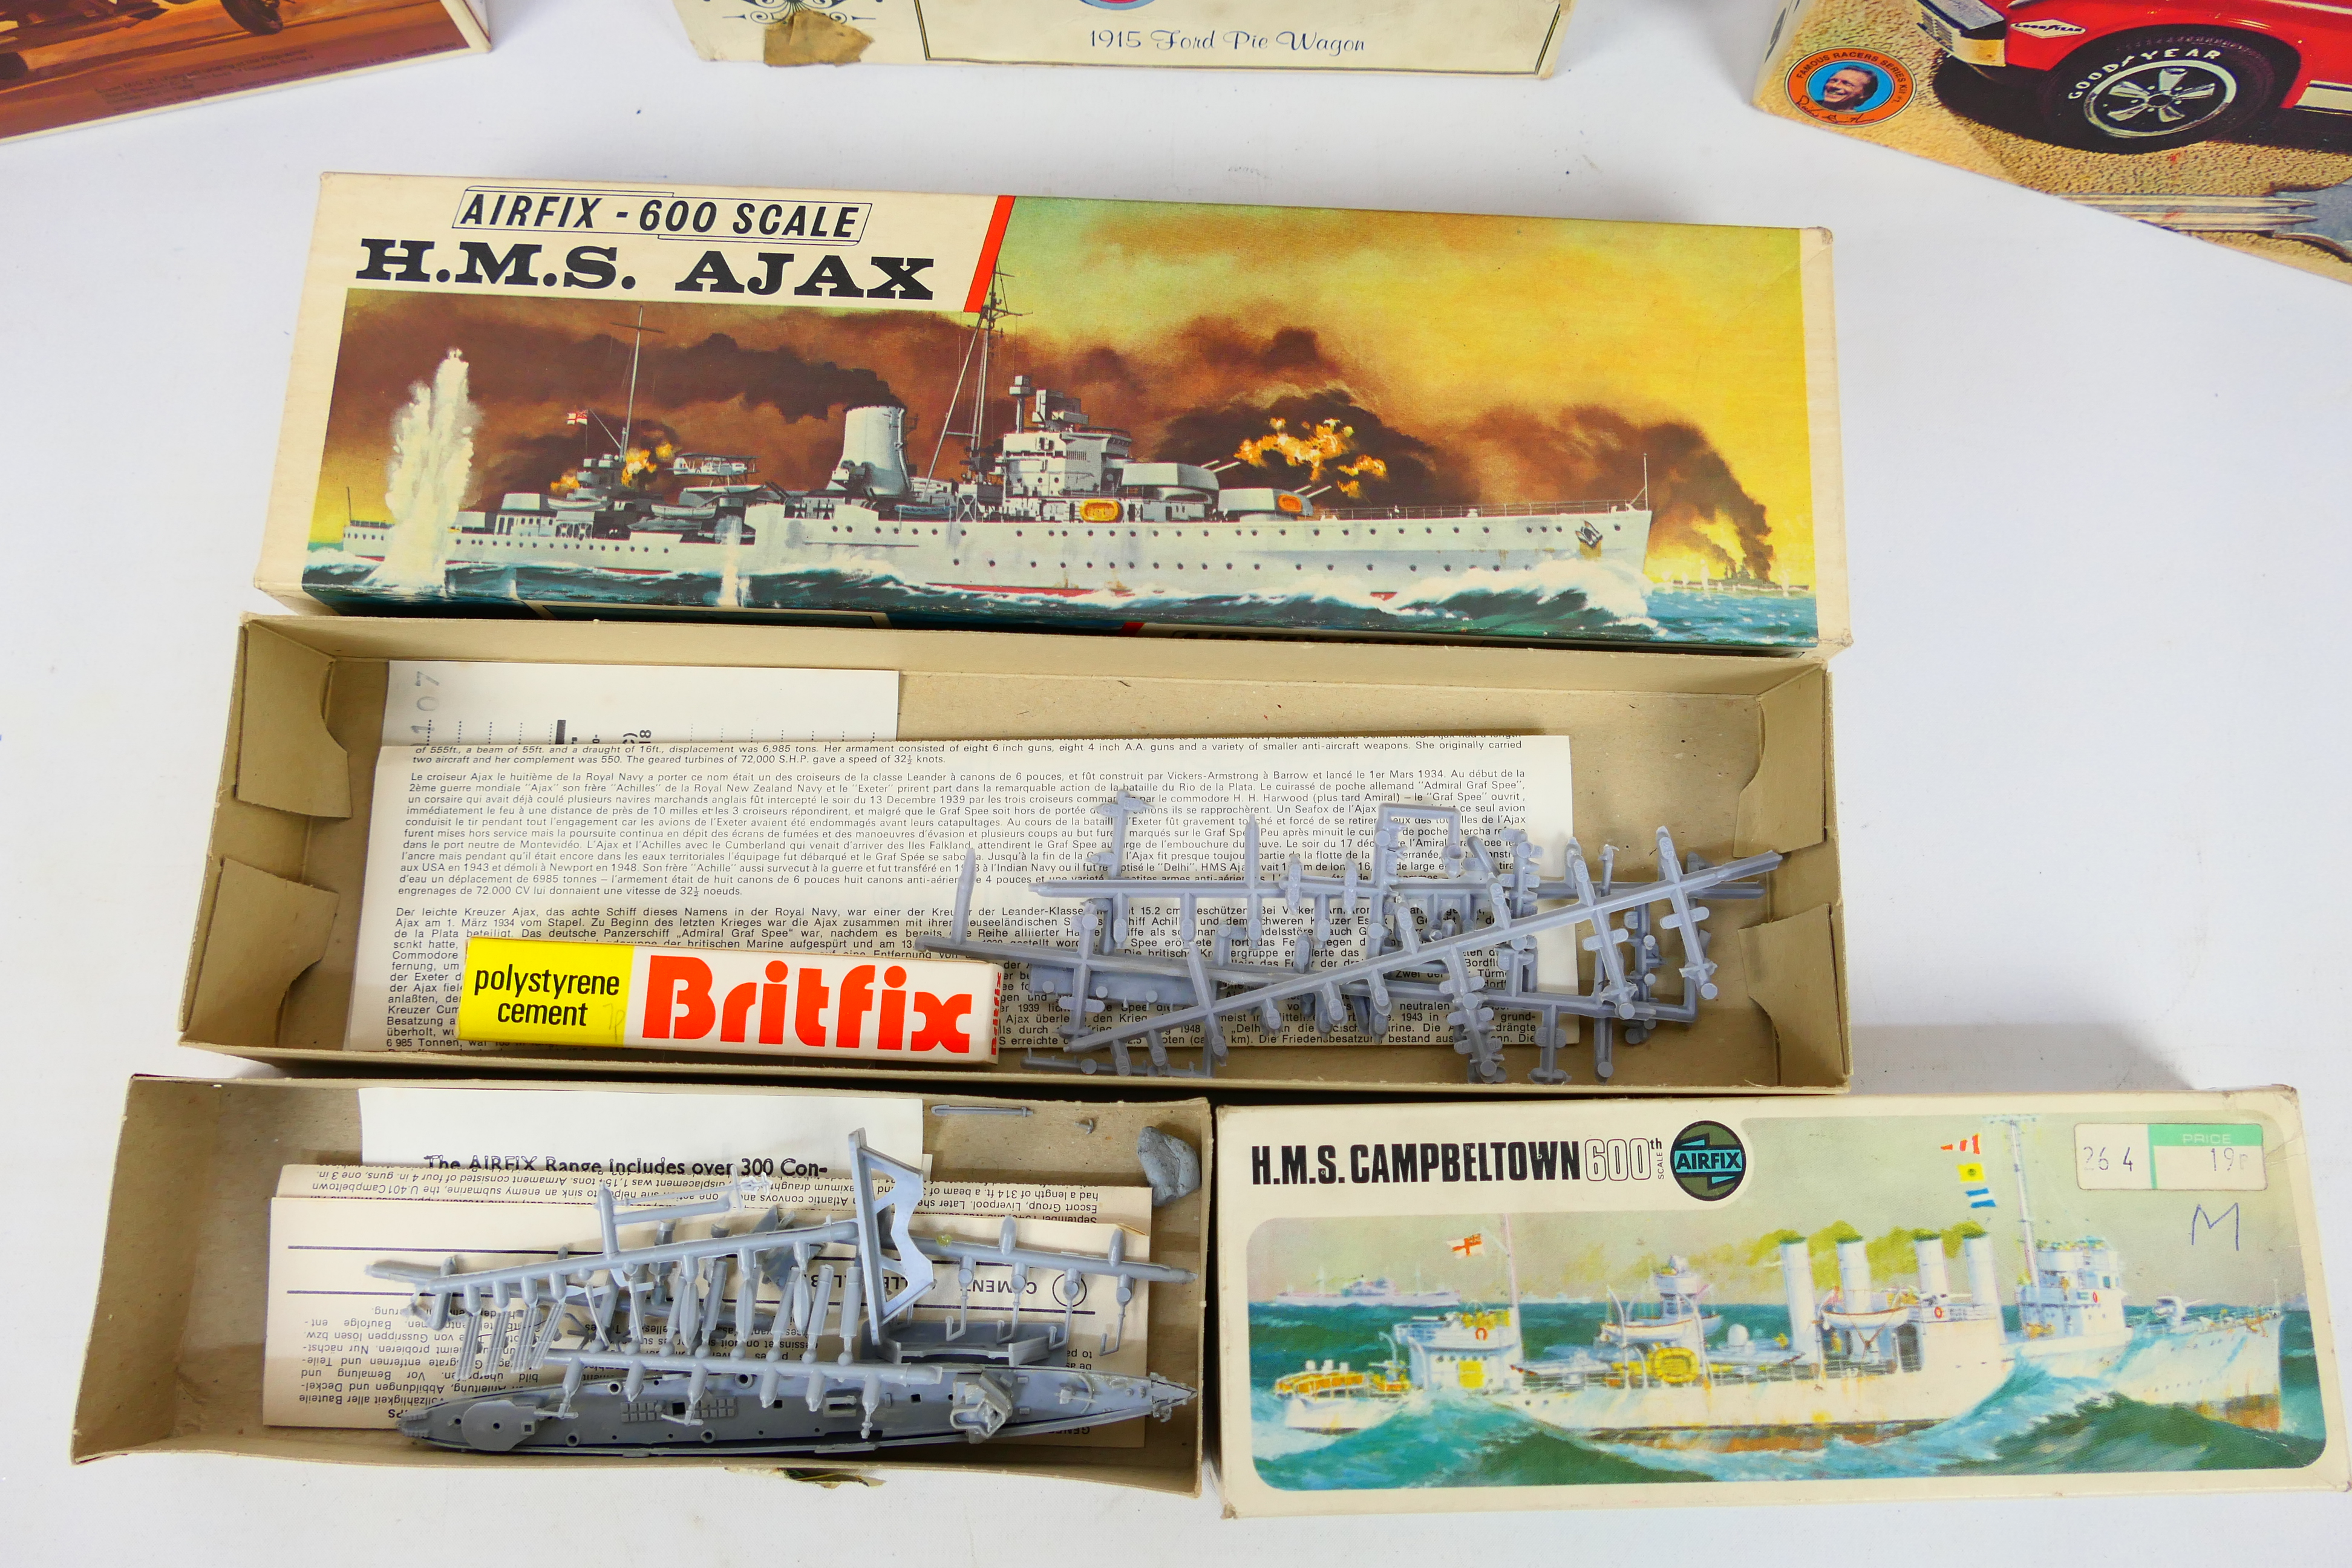 Revell - Pyro - Matchbox - Airfix - A group of part made vintage model kits, - Image 3 of 8